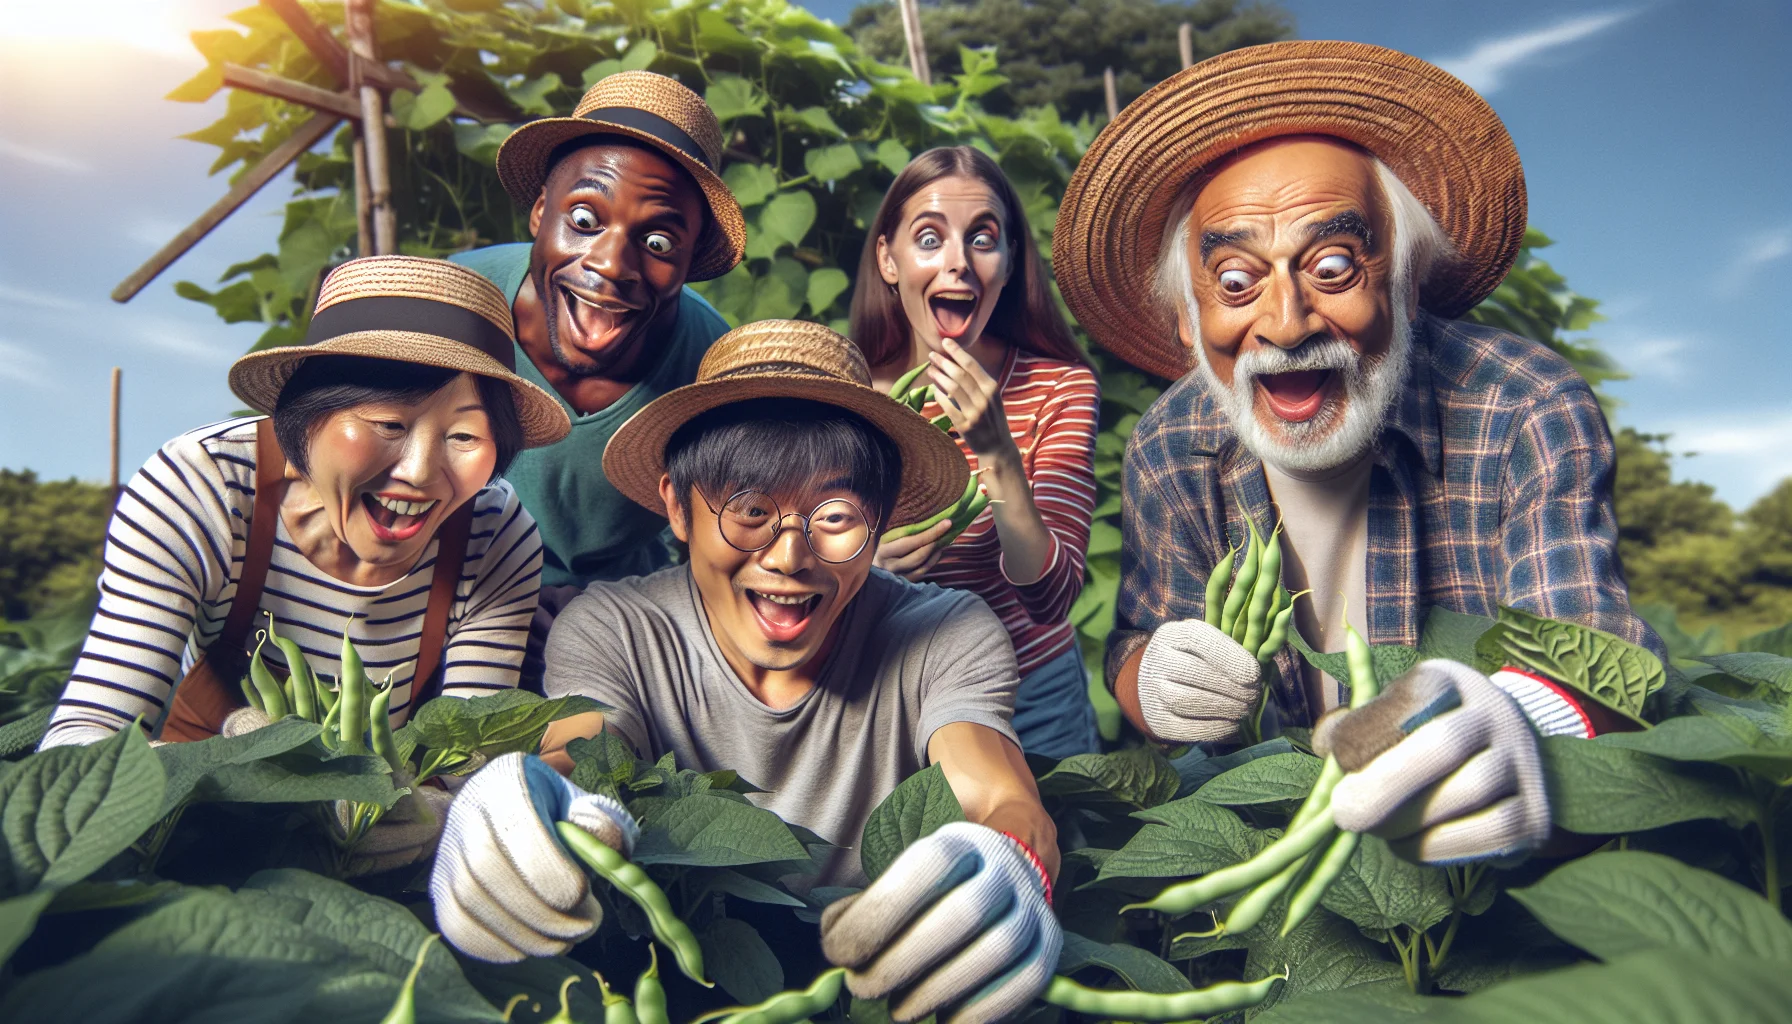 Create an amusing image of a diverse group of people spending a sunny day in a large vegetable garden. Show an East Asian woman, a Black man, a Caucasian teenager, and a South Asian elderly man jovially partaking in the act of harvesting green beans. Their faces express delight and surprise as they discover large, plump beans hiding among the foliage. Some of them wear comically oversized gardening gloves and straw hats with feathers. A playful atmosphere permeates the scene, with vibrant colors and soft shadows intertwining, thus highlighting the joys of gardening.